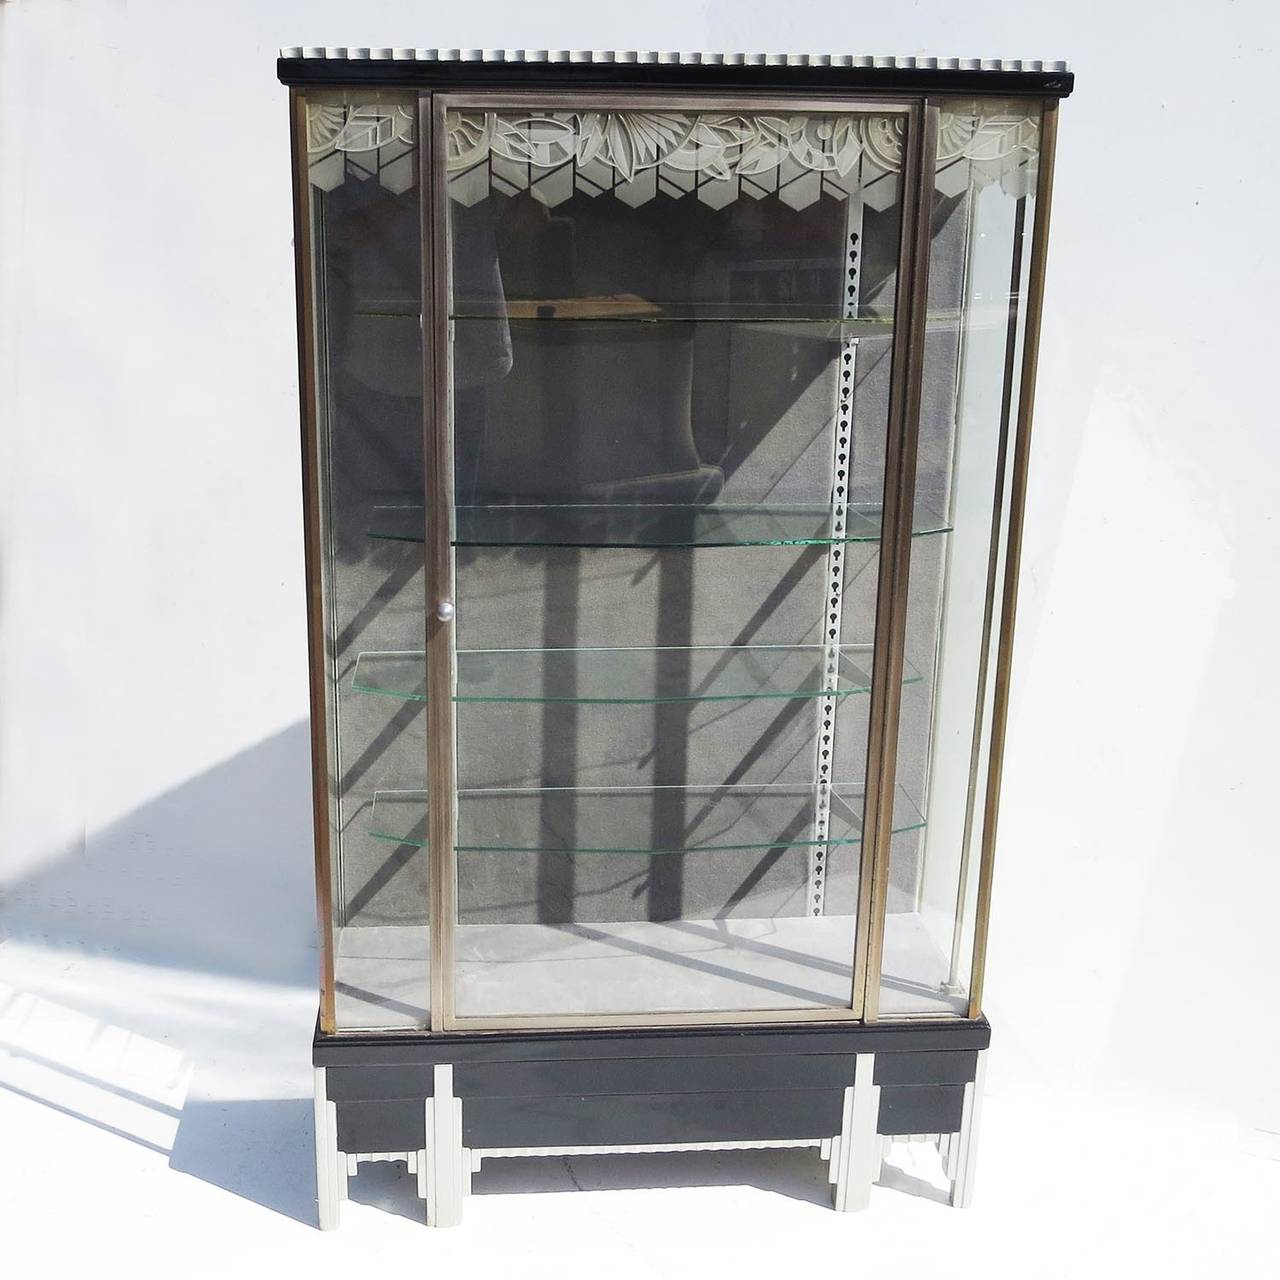 One of the best we have ever seen! The case is made of a combination of bronze, etched glass, and lacquered woods. The glass panels are carved in a geometric pattern on the outside, and frosted with a complimentary pattern on the inside. The base of